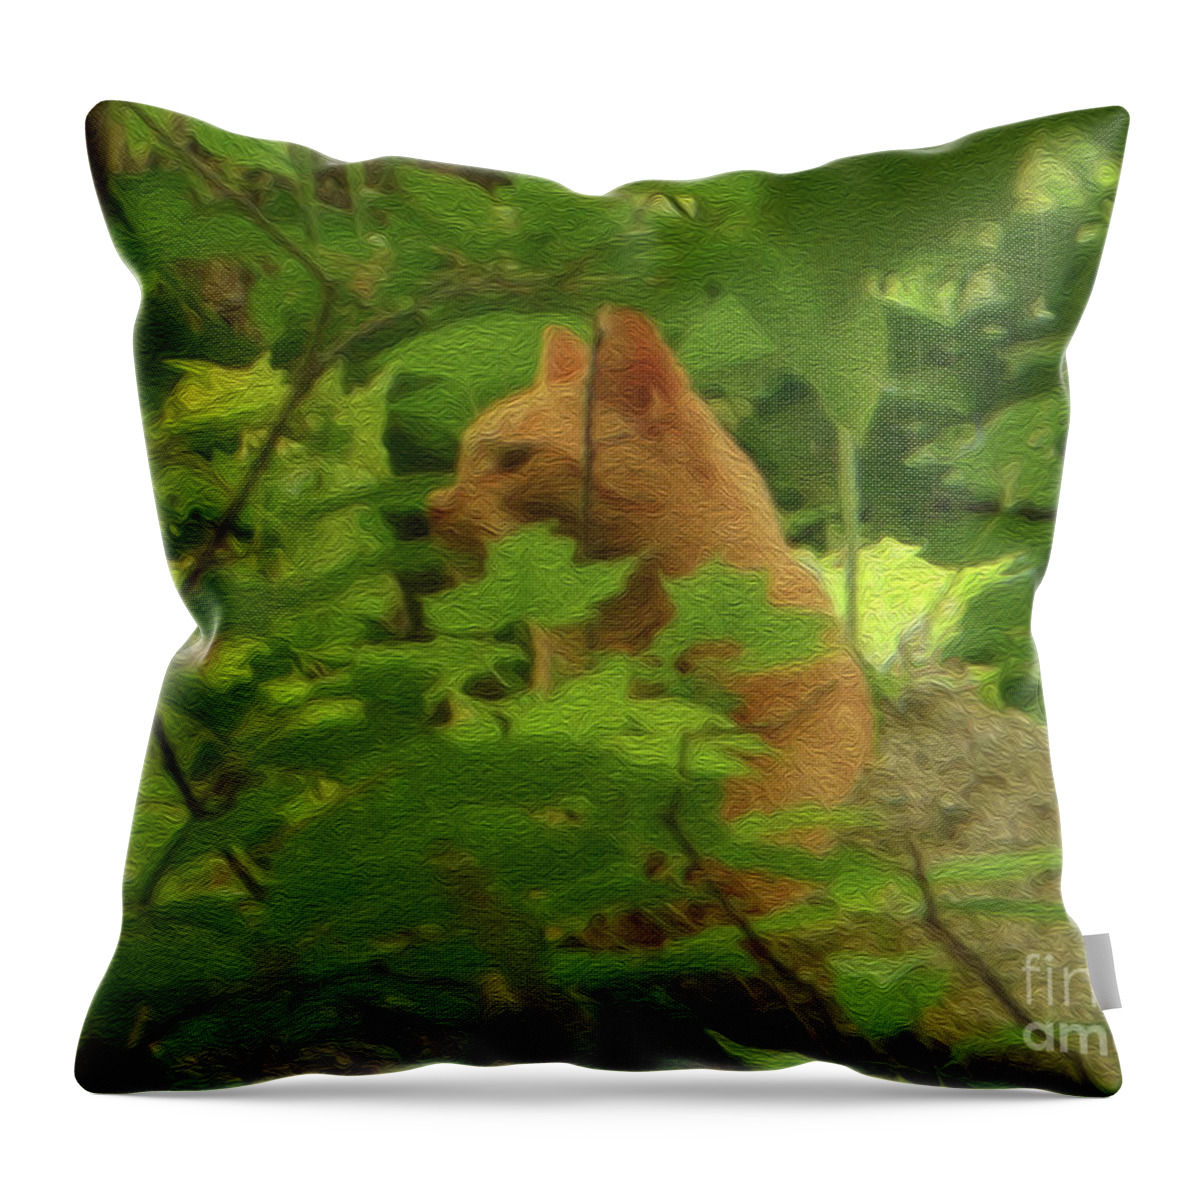 Orange Forest Throw Pillow featuring the photograph Orange Forest Cat by Rockin Docks